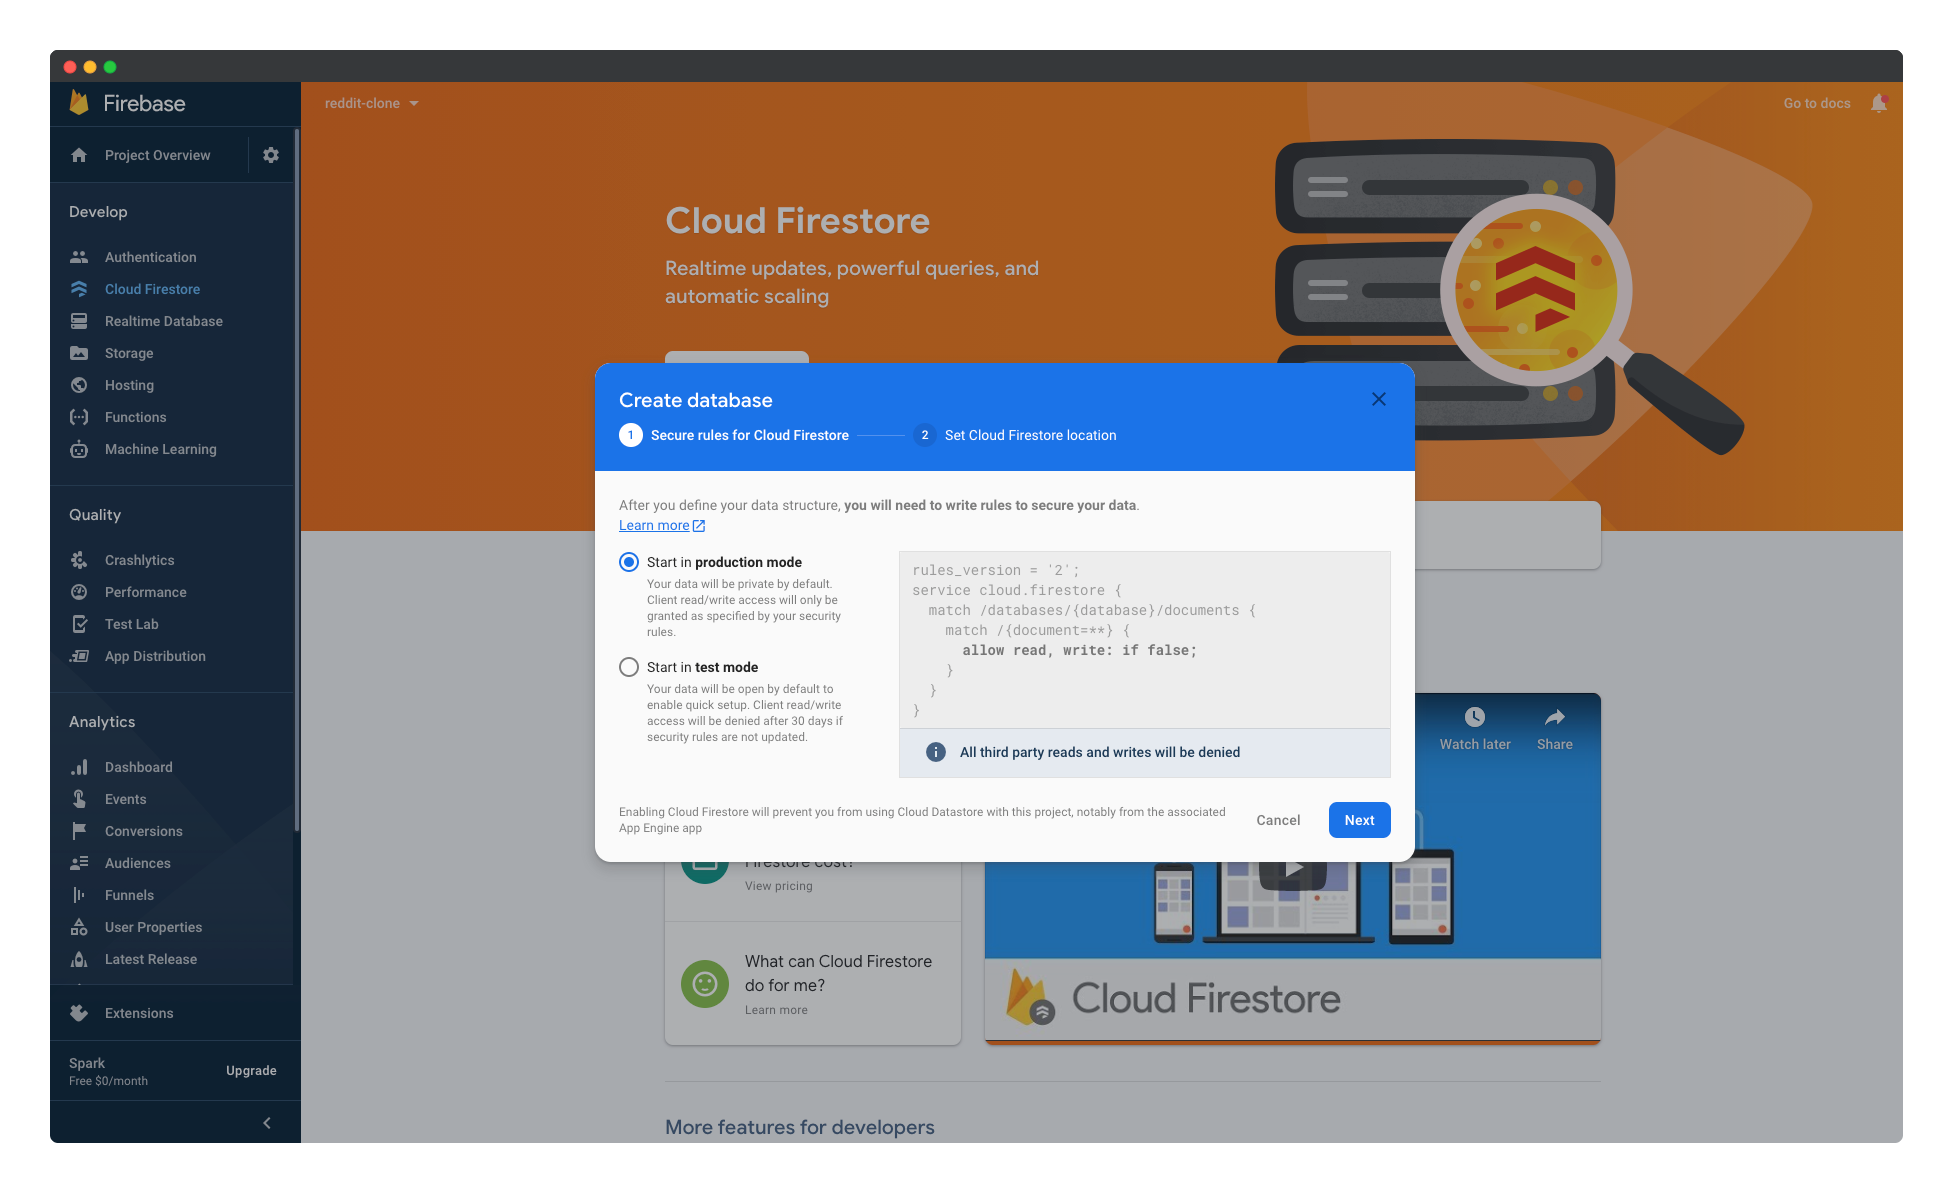 Selecting the option to start the Firebase Cloud Firestore in production mode